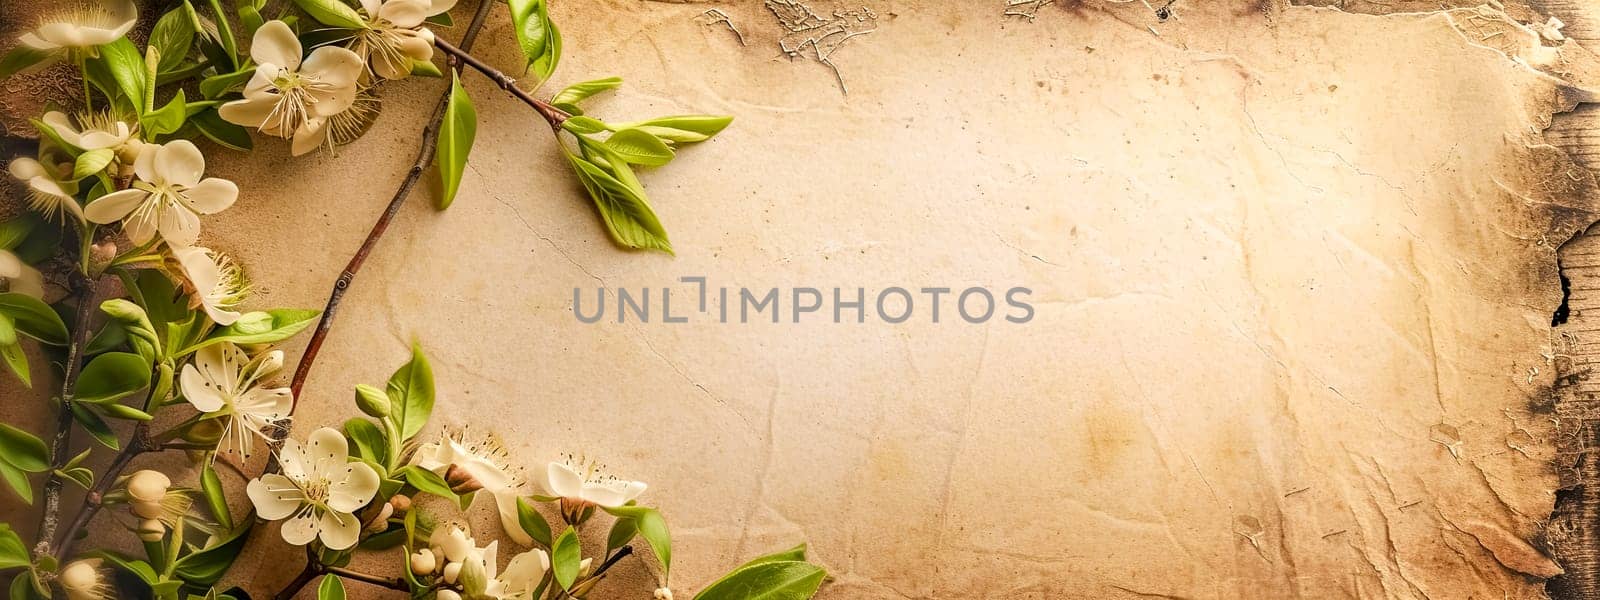 Vintage floral parchment on rustic wood background with natural landscape, terrestrial plants, and rustic wooden tints and shades. by Edophoto